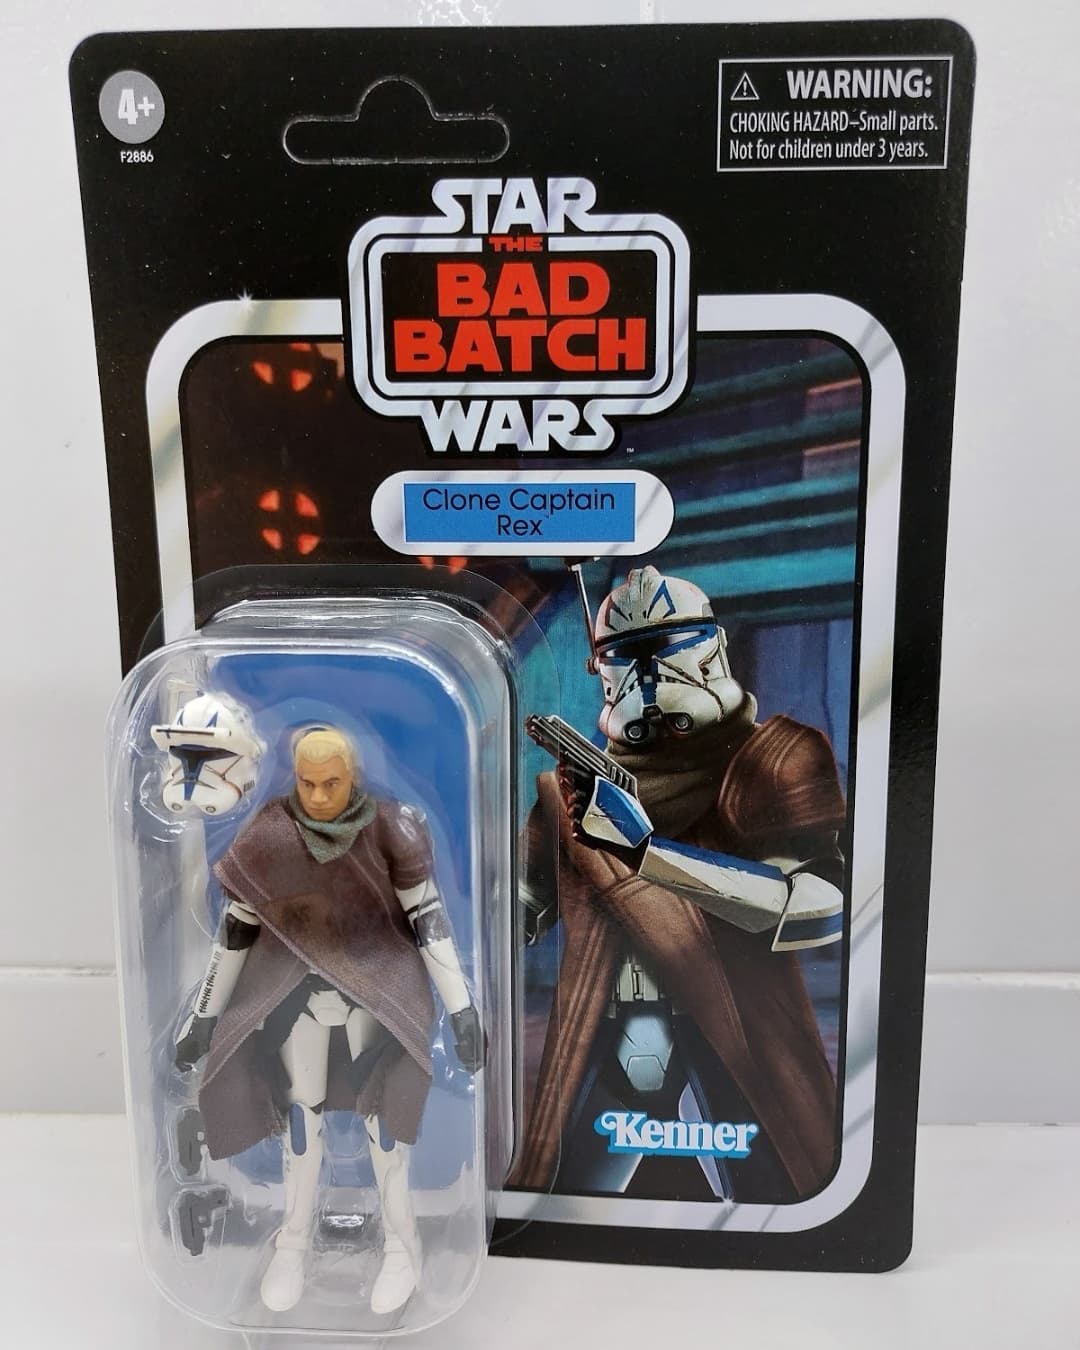 Star Wars Vintage Collection Bad Batch 4pack Amazon Exclusive UNPUNCHED PREORDER